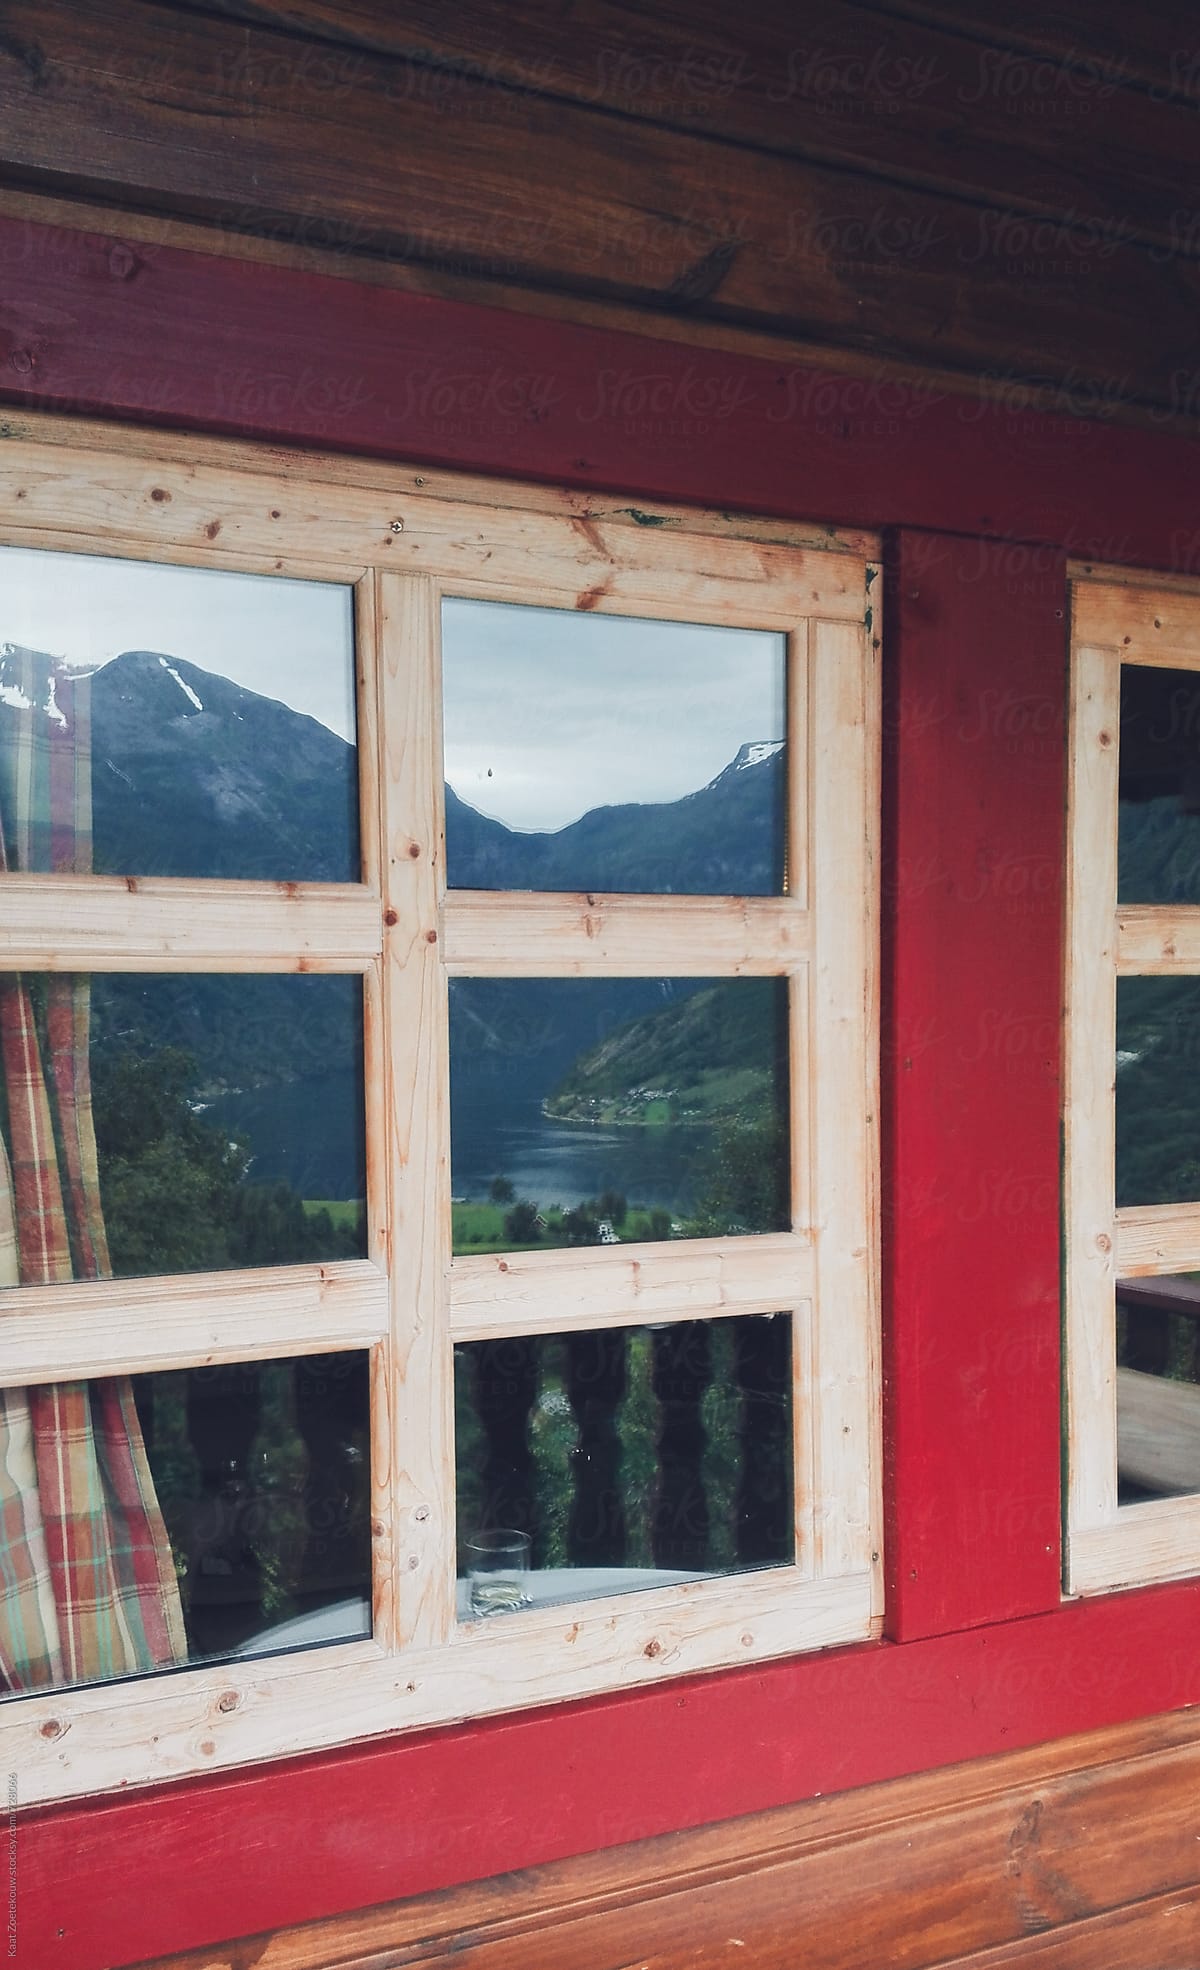 Mountain and fjord view reflected in cozy cabin window